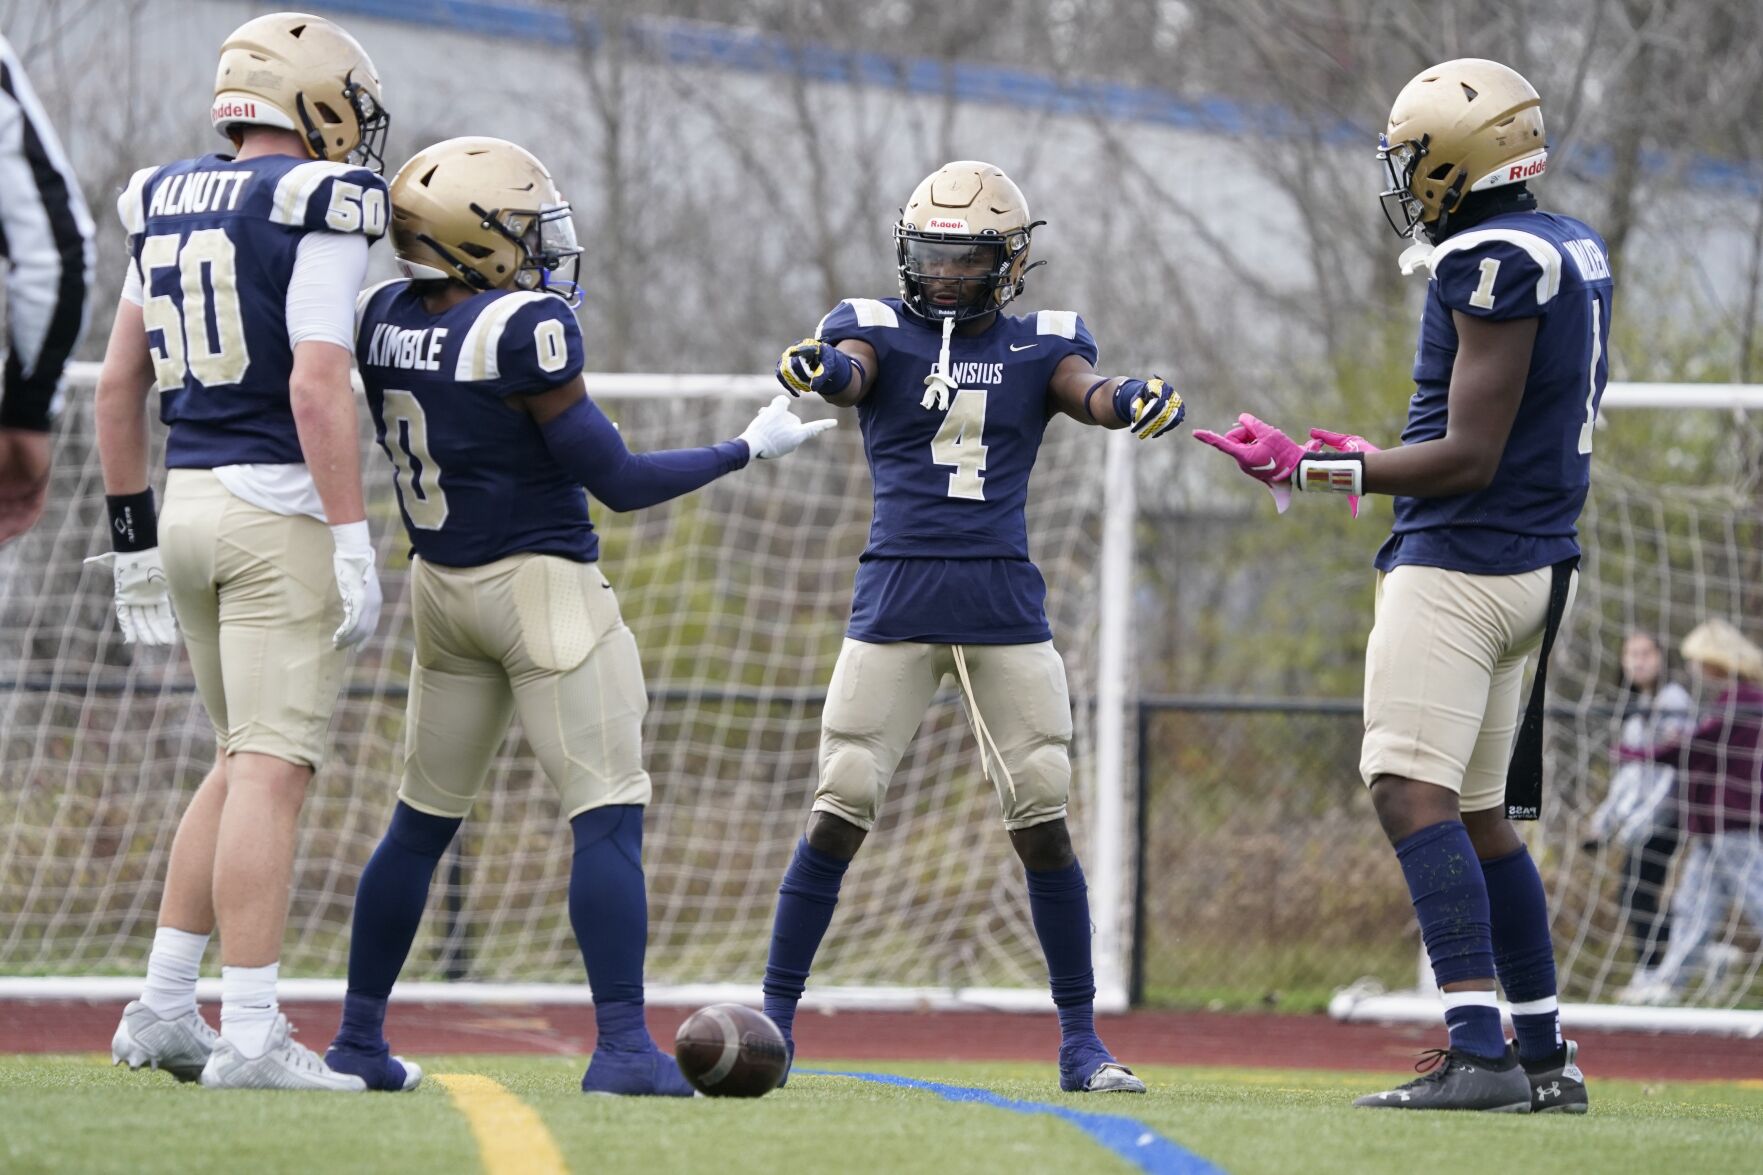 Canisius High School dominates St. Joseph’s Collegiate Institute with a resounding 42-0 victory in their 100th meeting